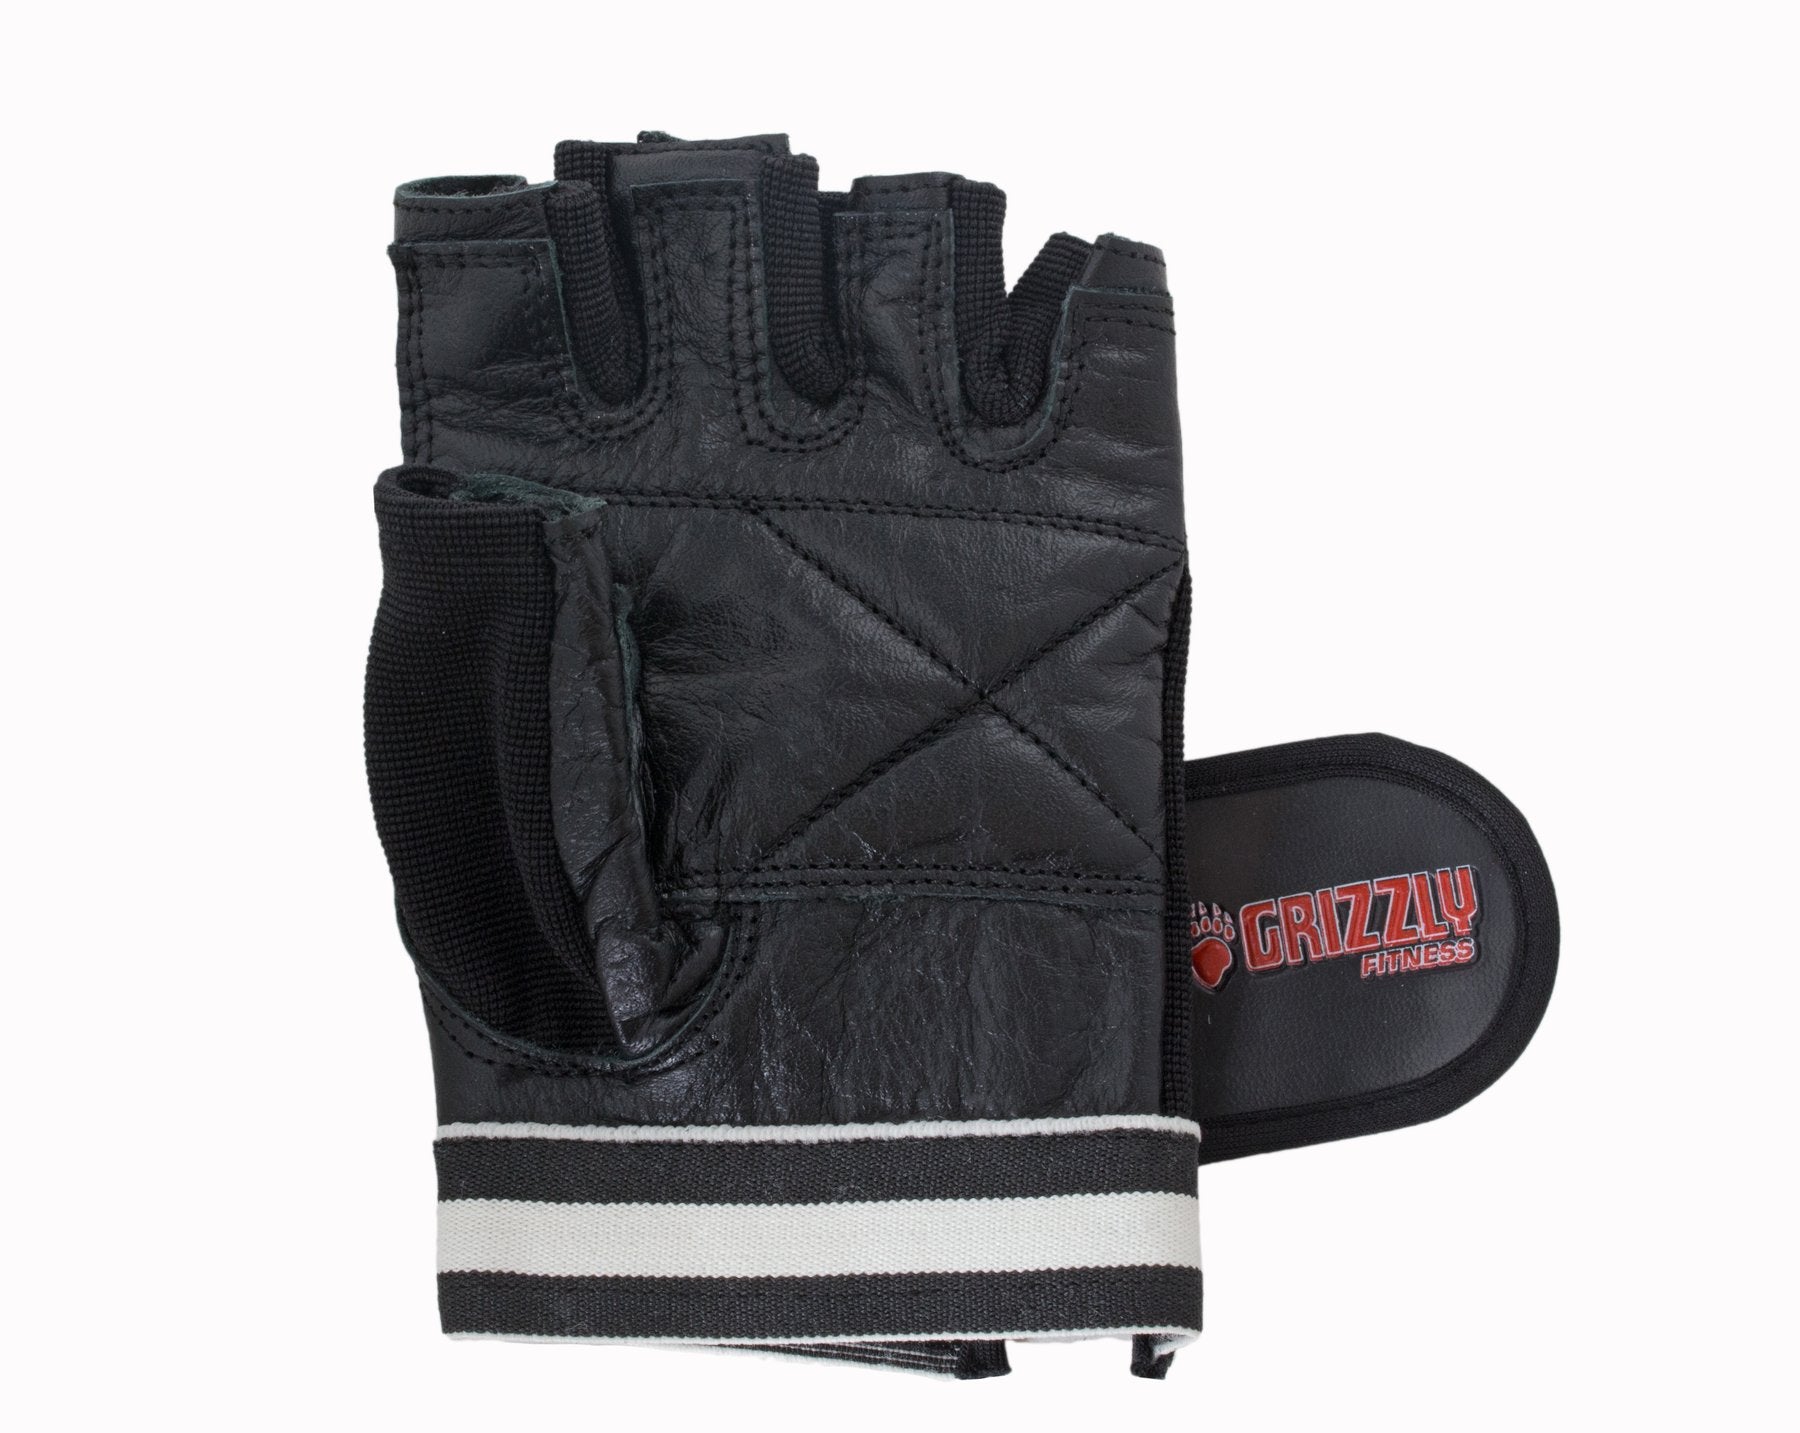 GRIZZLY PAW PREMIUM PADDED TRAINING GLOVES – Ernie's Sports Experts